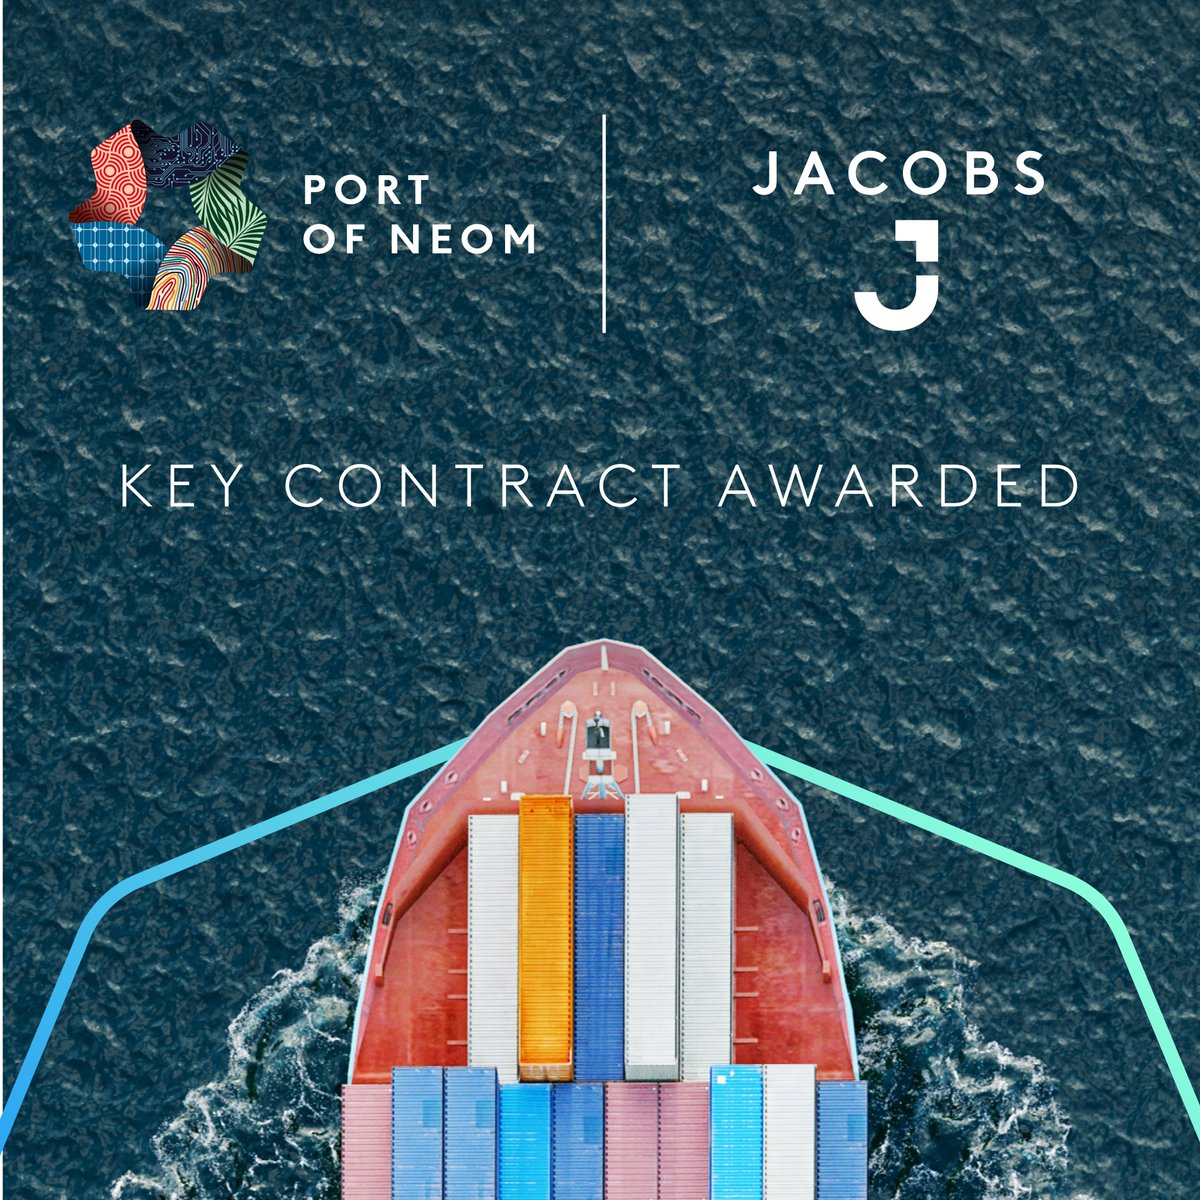 We've appointed @JacobsConnects as our main design consultant for #PortofNEOM, with a contract valued at over SAR 180M. ​

Their remit includes using sustainable concepts & materials to enhance container terminals and create a fully-automated 200,000m2 distribution center​.